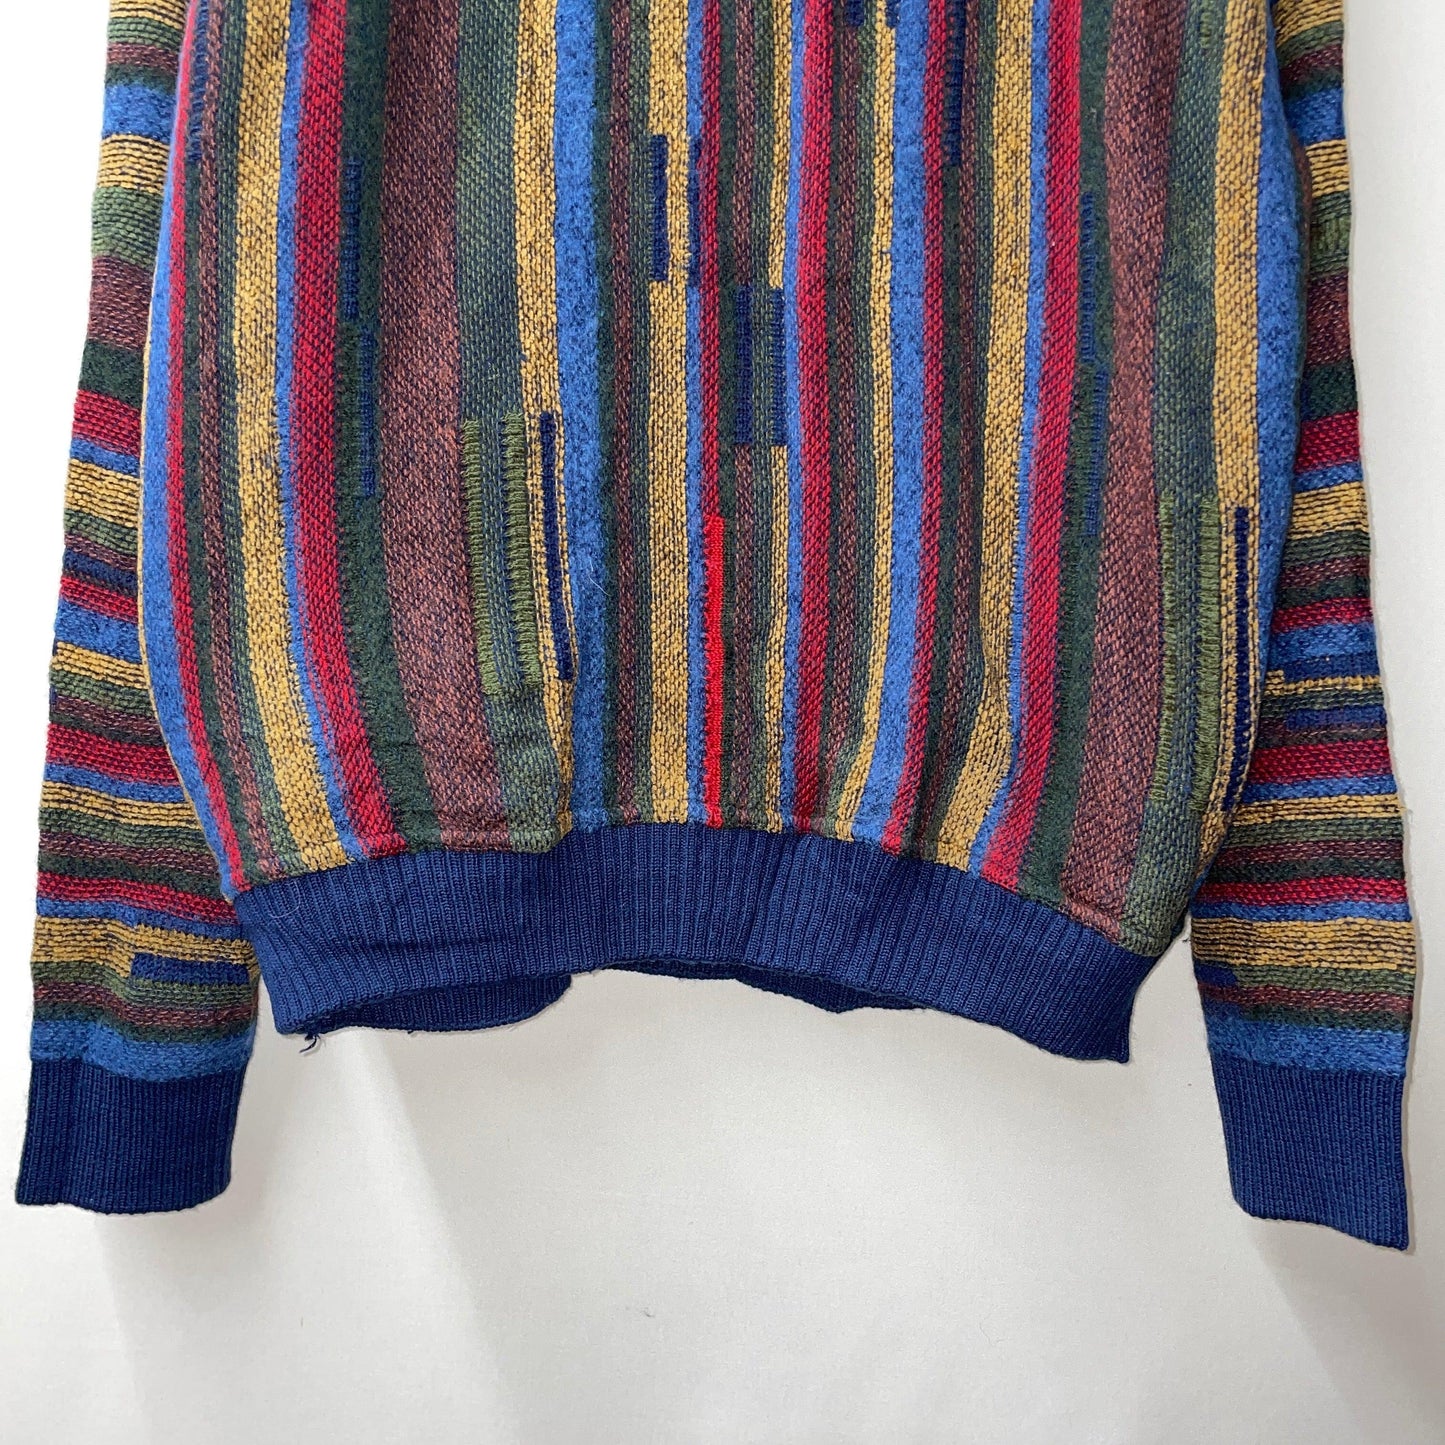 norm thompson knit knit/sweater